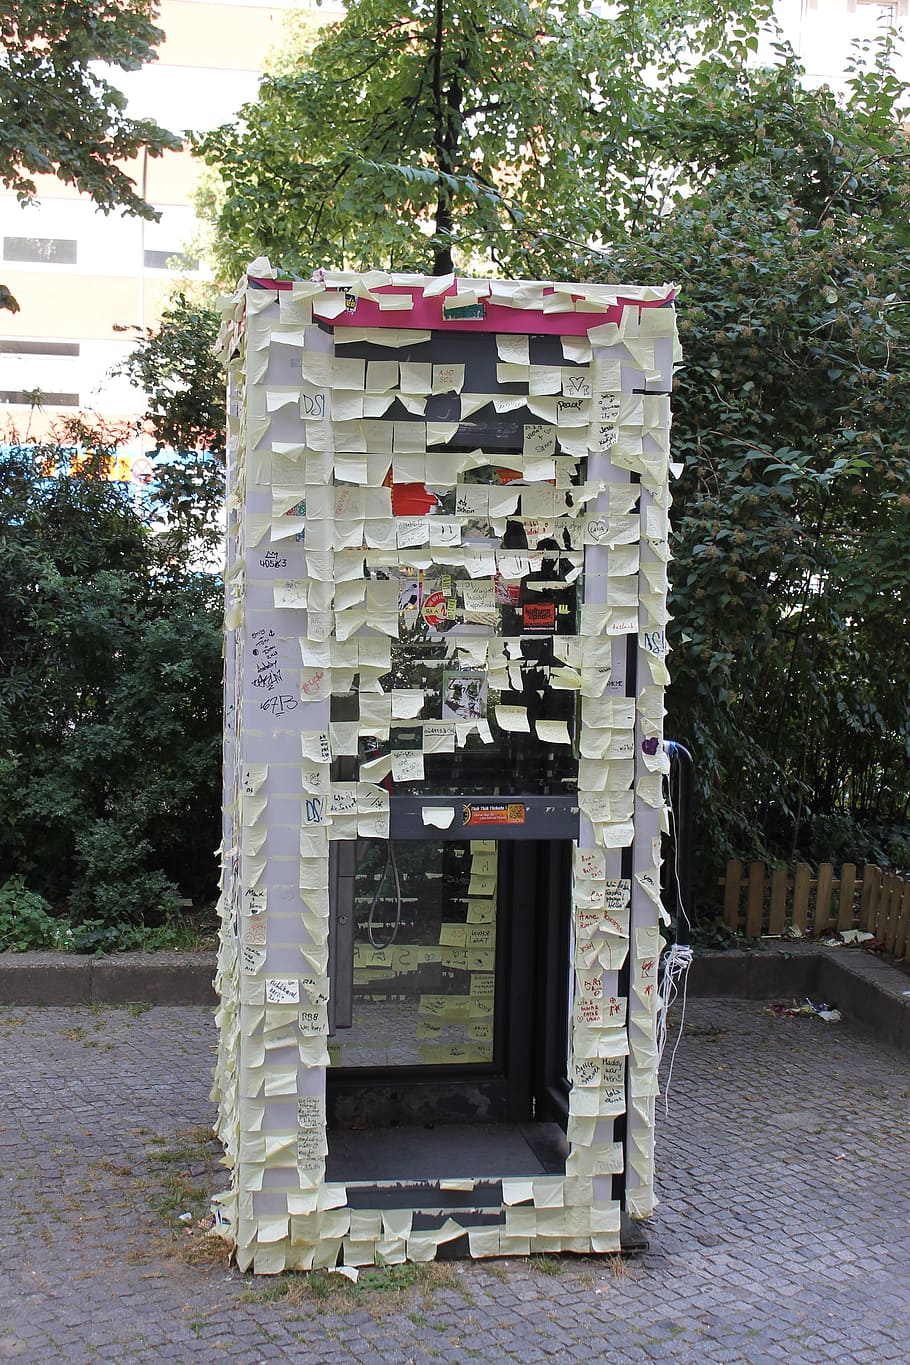 Postit, Berlin, Phone Booth, notes, tree, day, outdoors, built structure, building exterior, plant